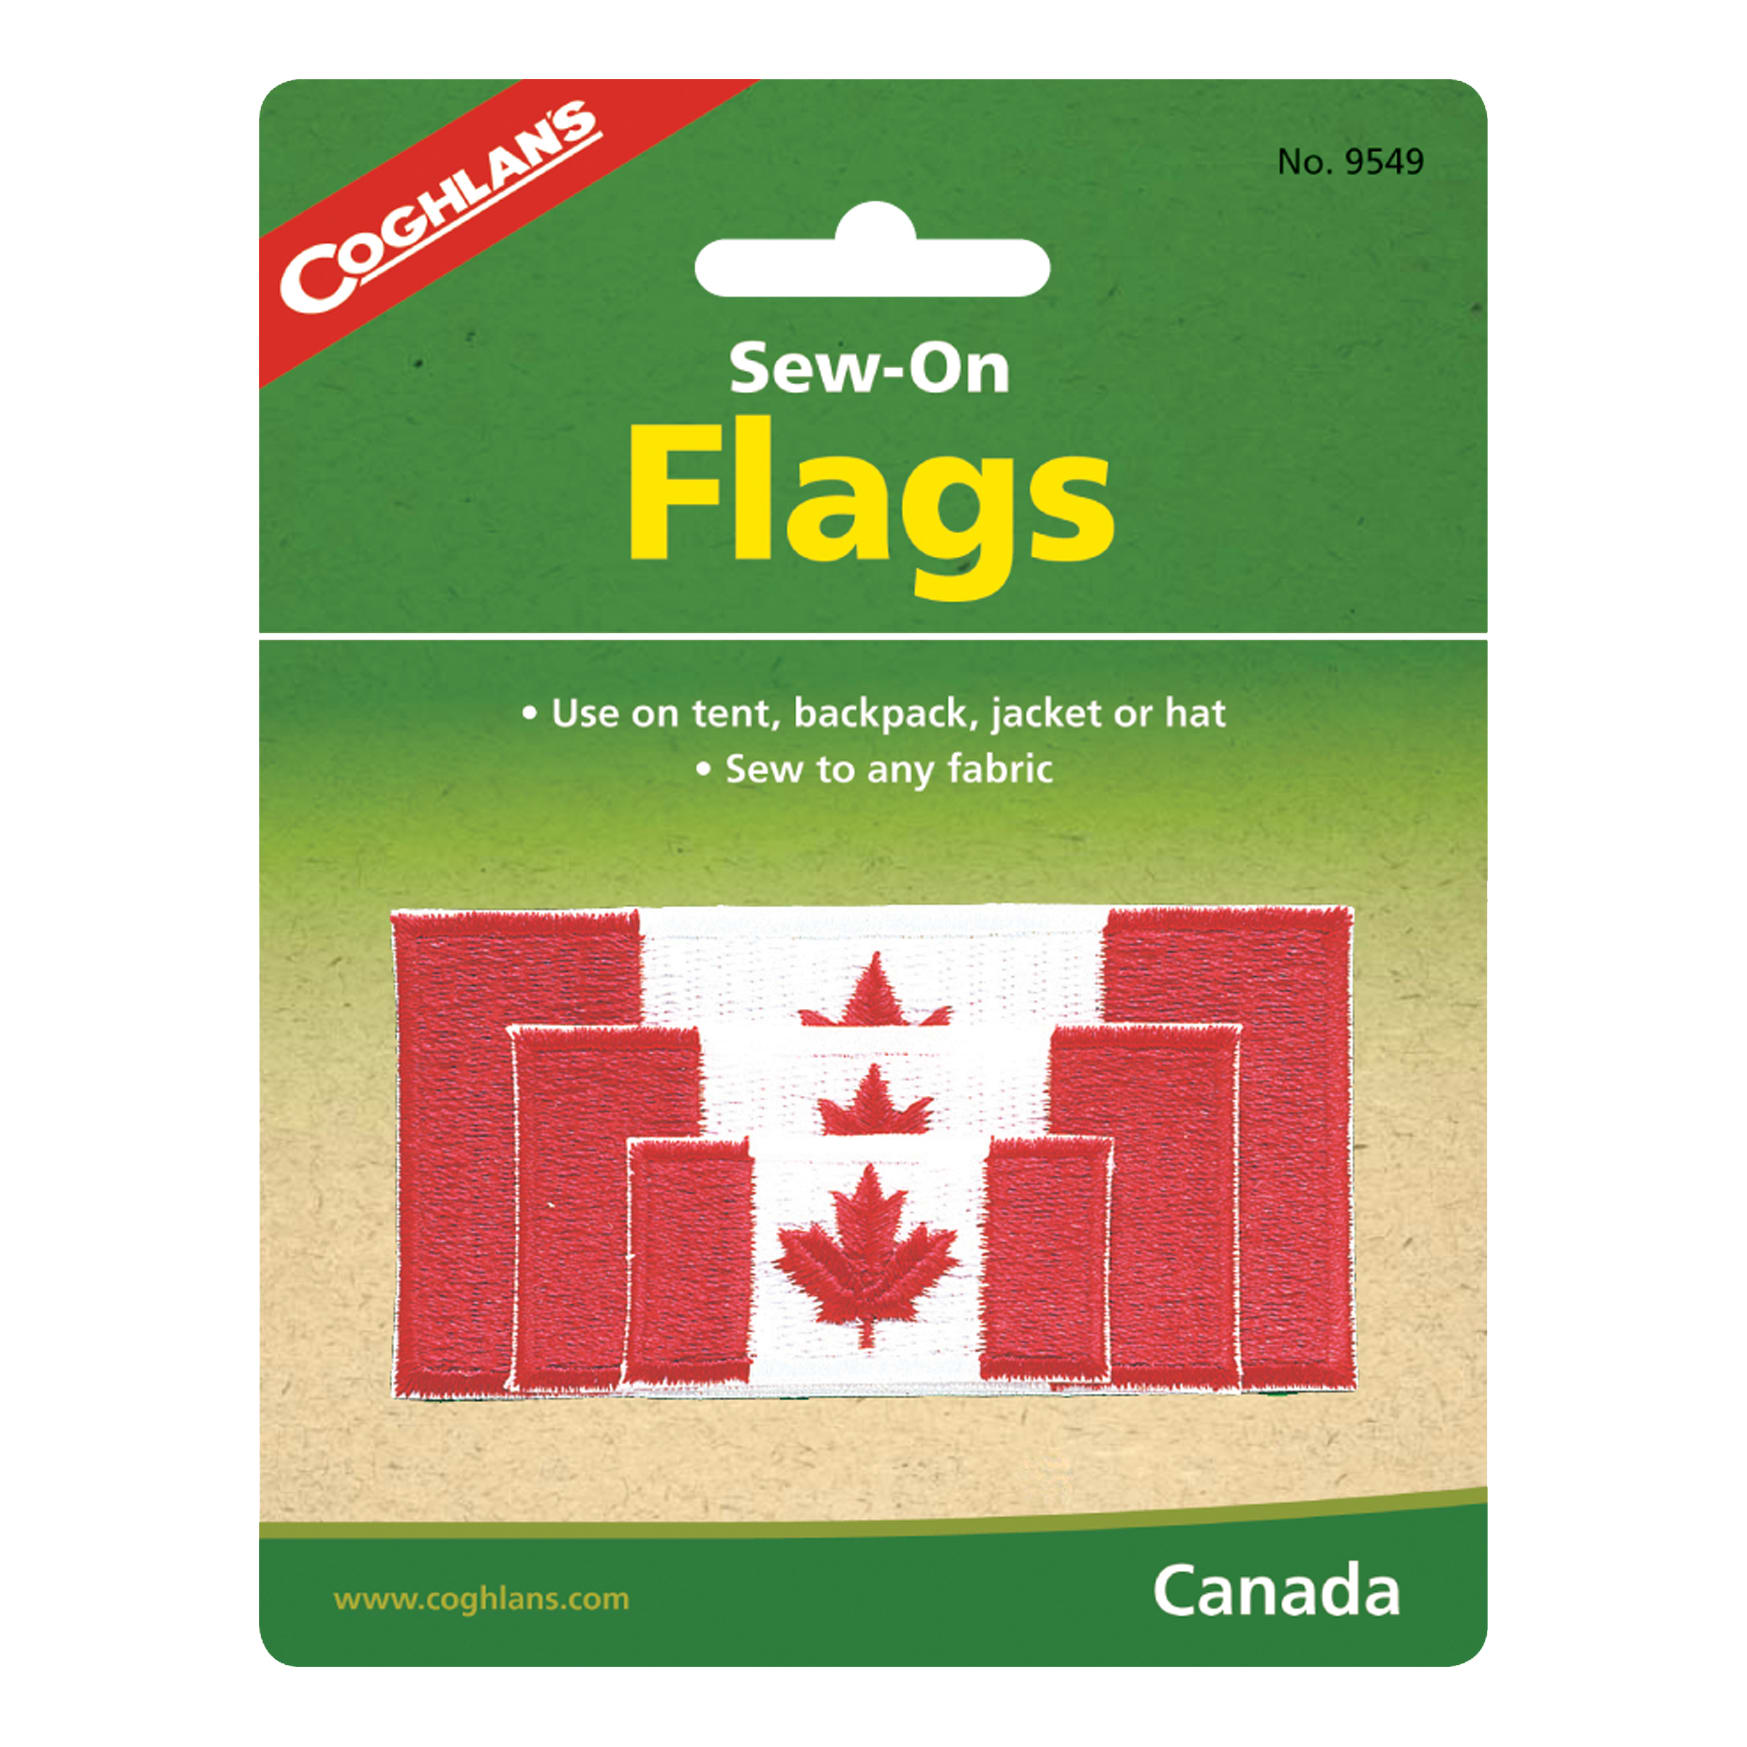 Coghlan's Canadian Sew-On Flags